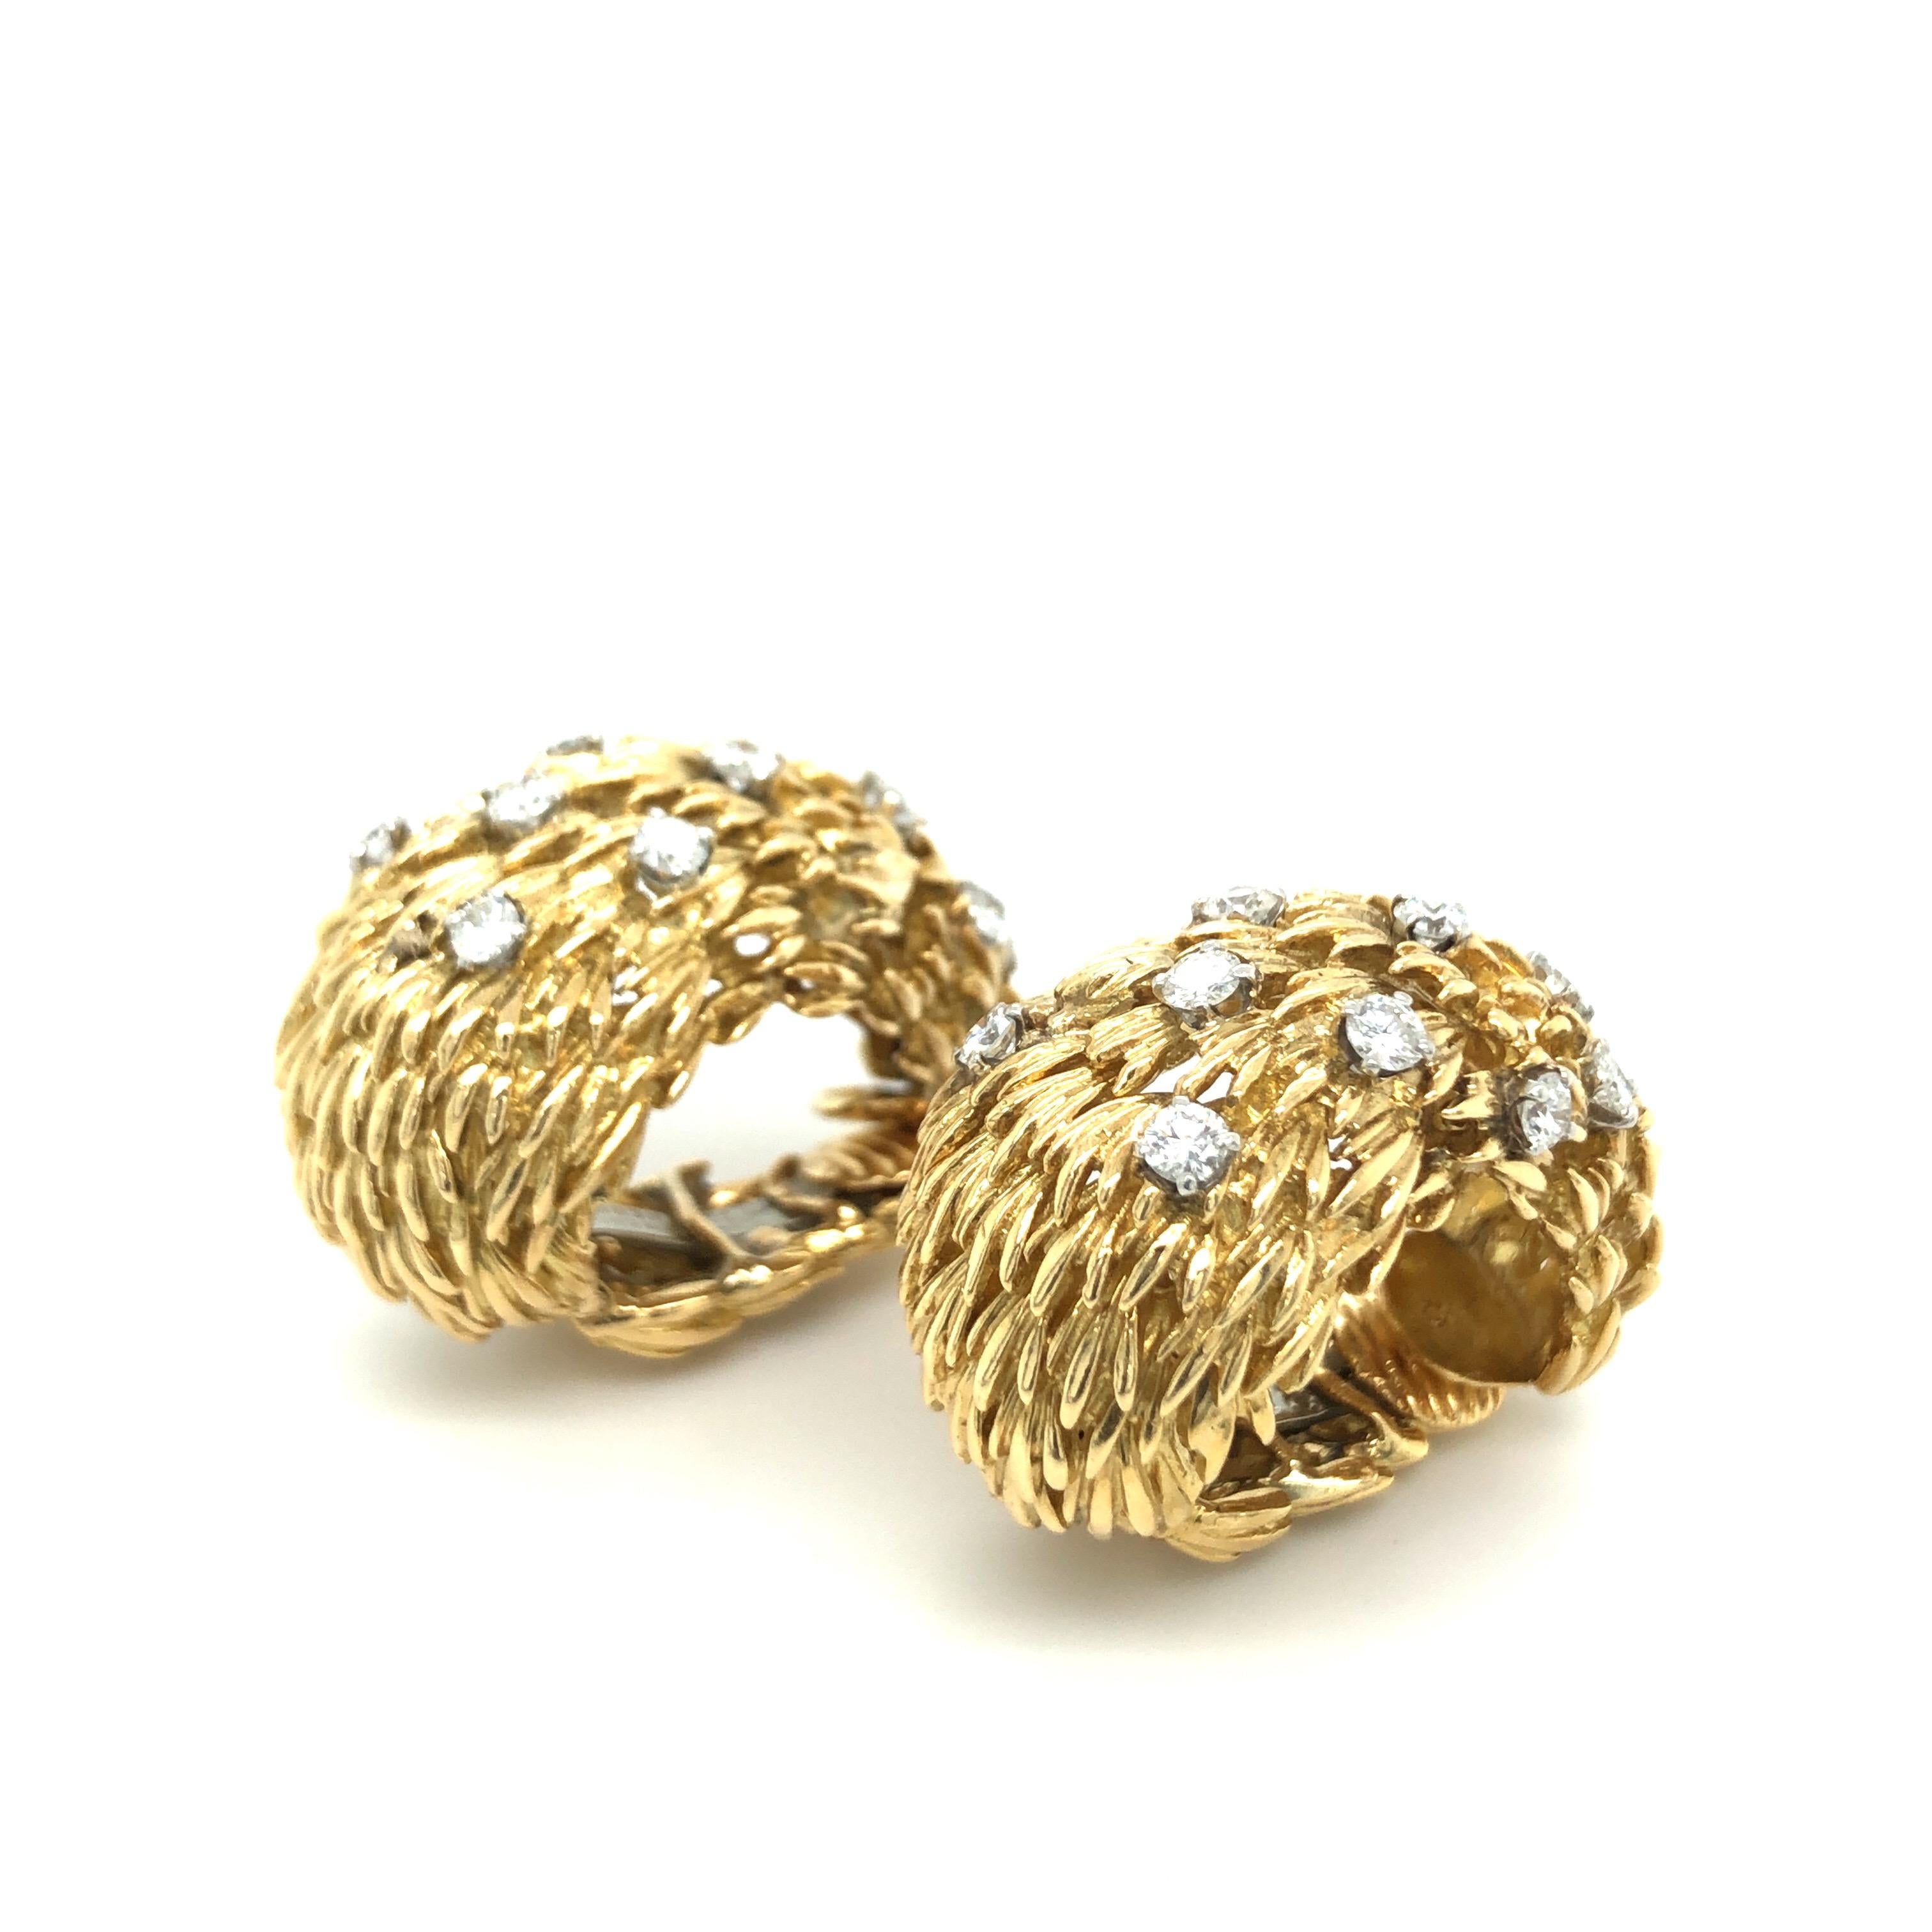 David Webb 18 karat yellow gold and diamond half hoop clip-on earrings, 1960s.
Stylish pair of ear clips of domed form, fully covered with gold wire spikes and interspersed with 22 brilliant-cut diamonds totalling circa 1.6 carats. The reverse of